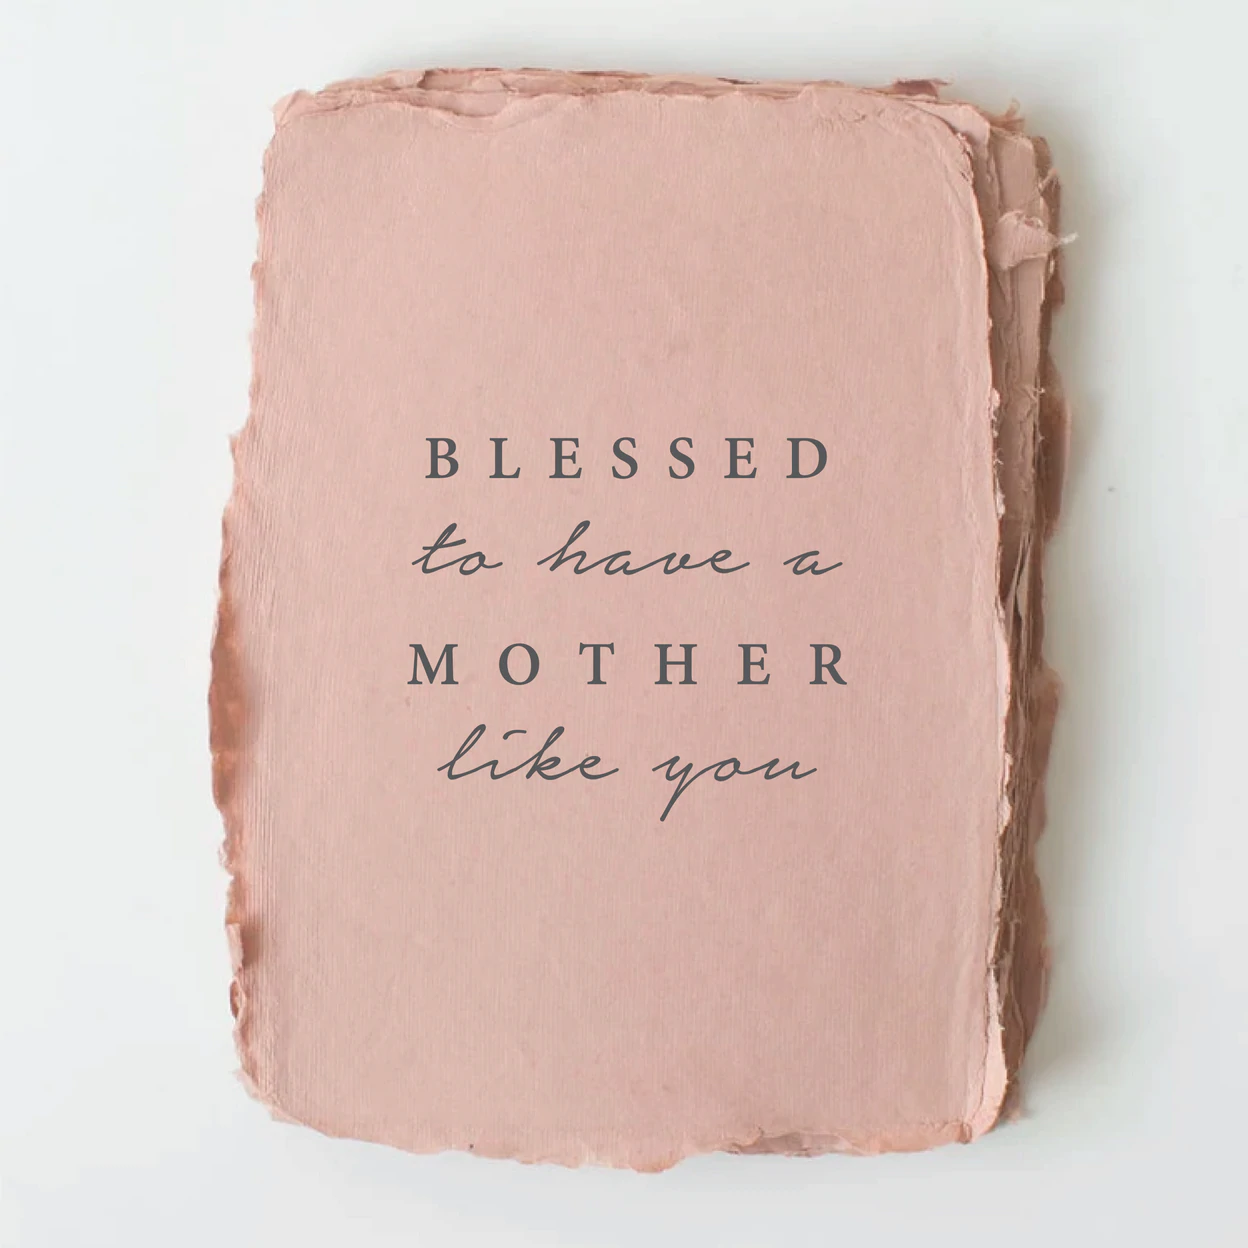 Paper Baristas "Blessed to have a mother like you" Mother's Day Card